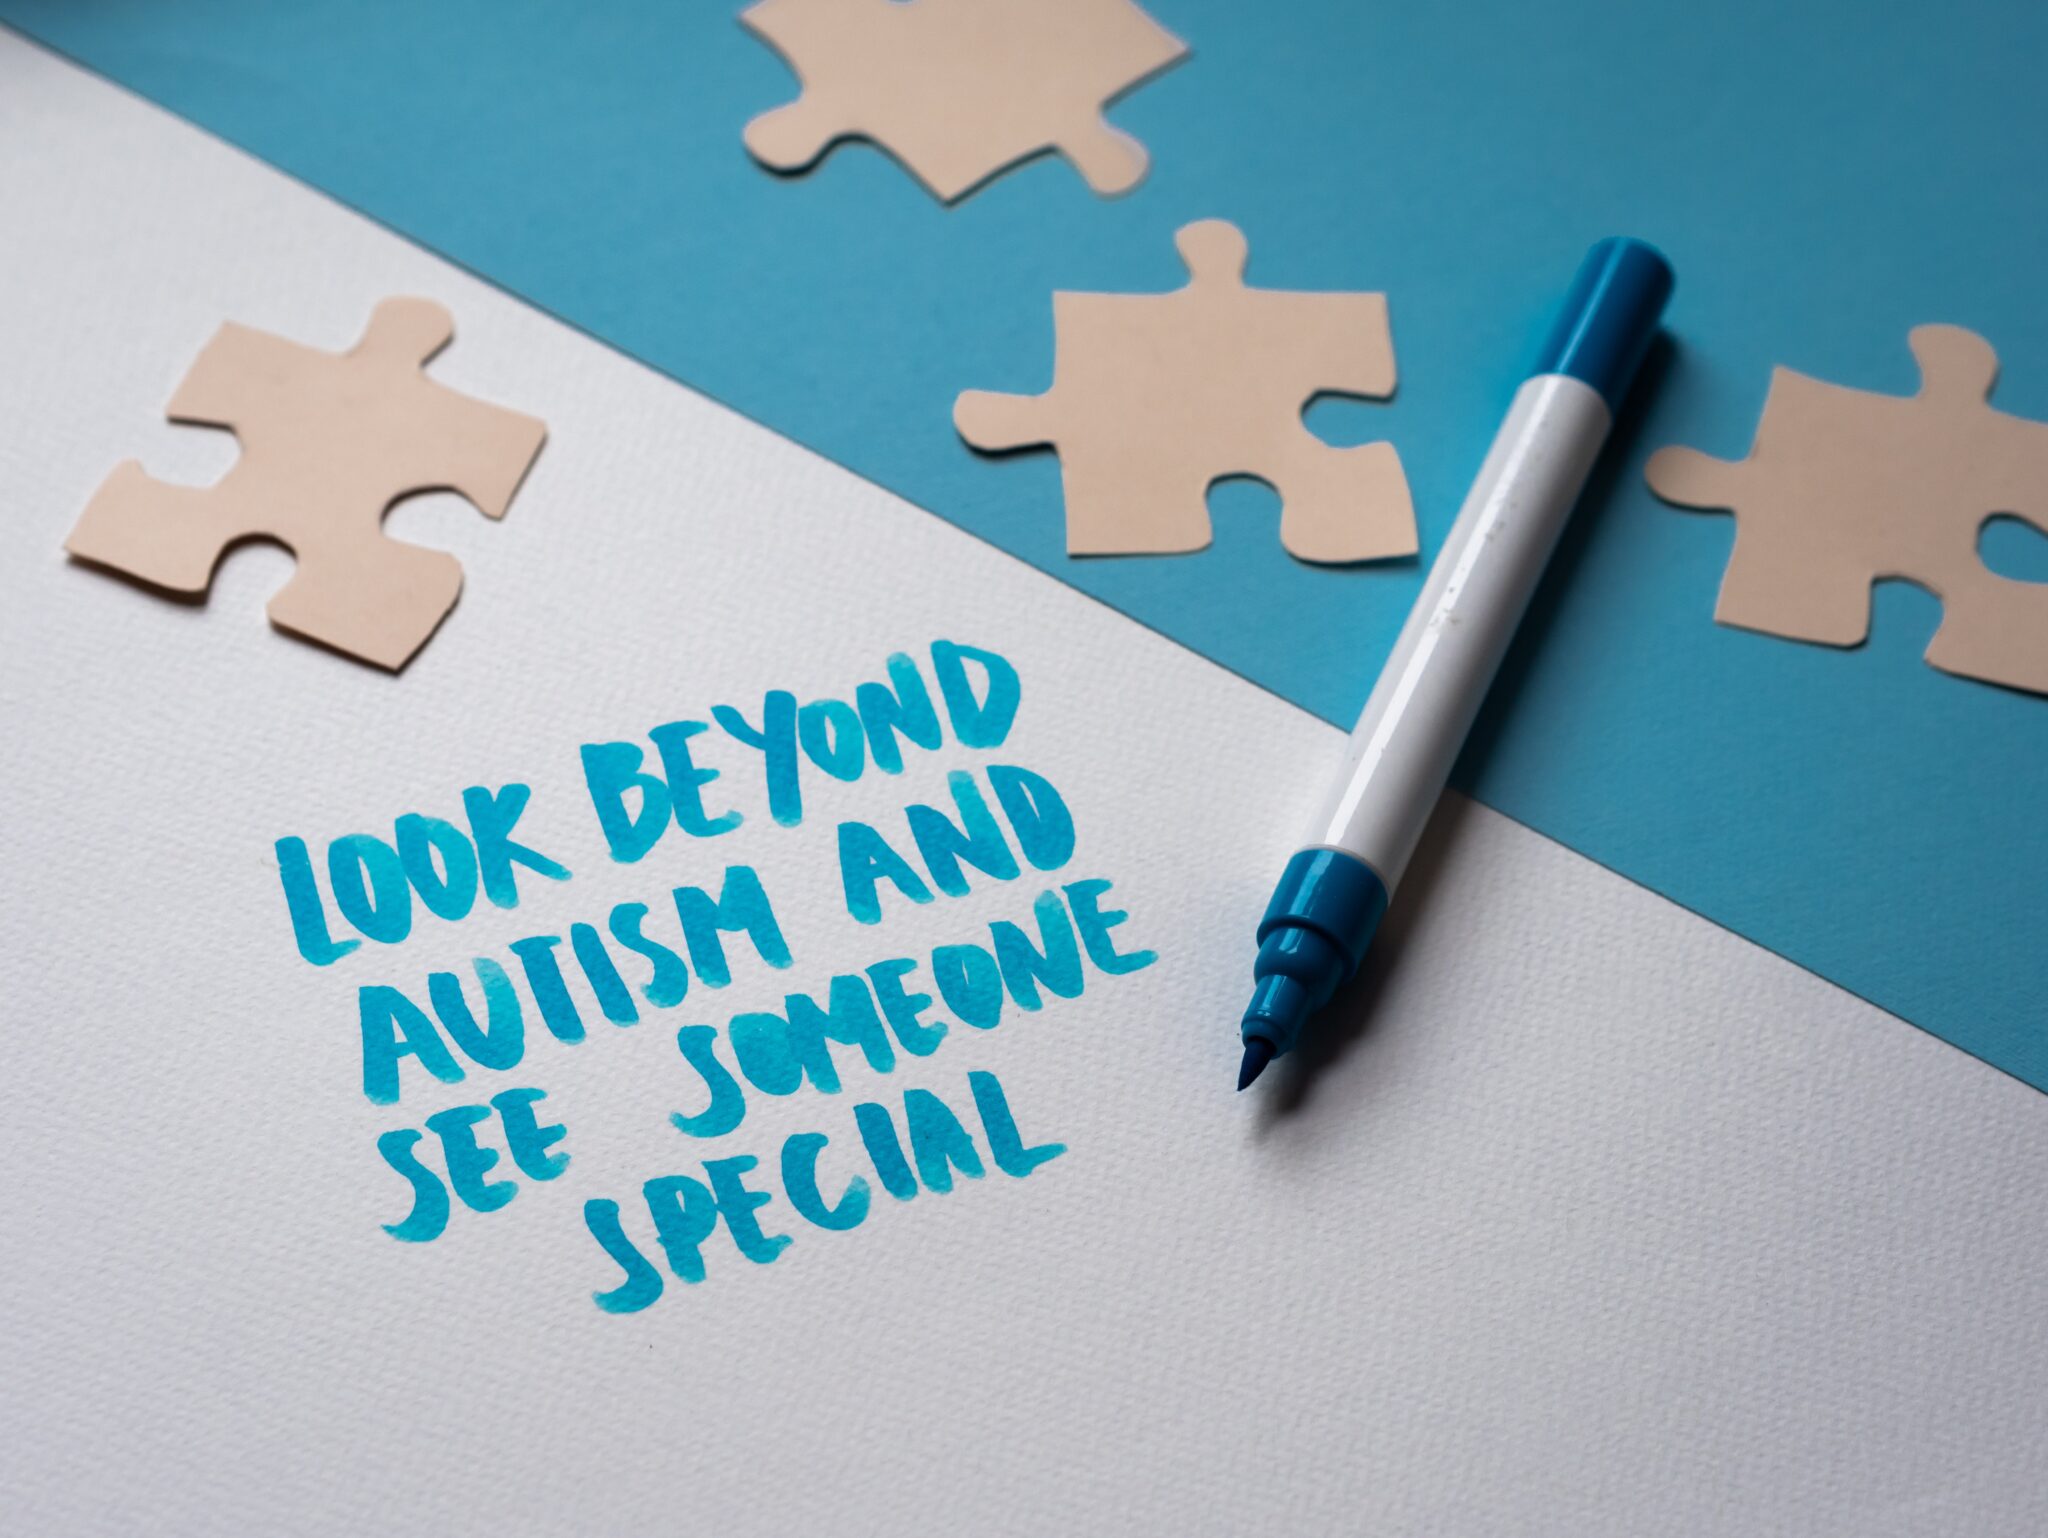 Look Beyond Autism and see someone special